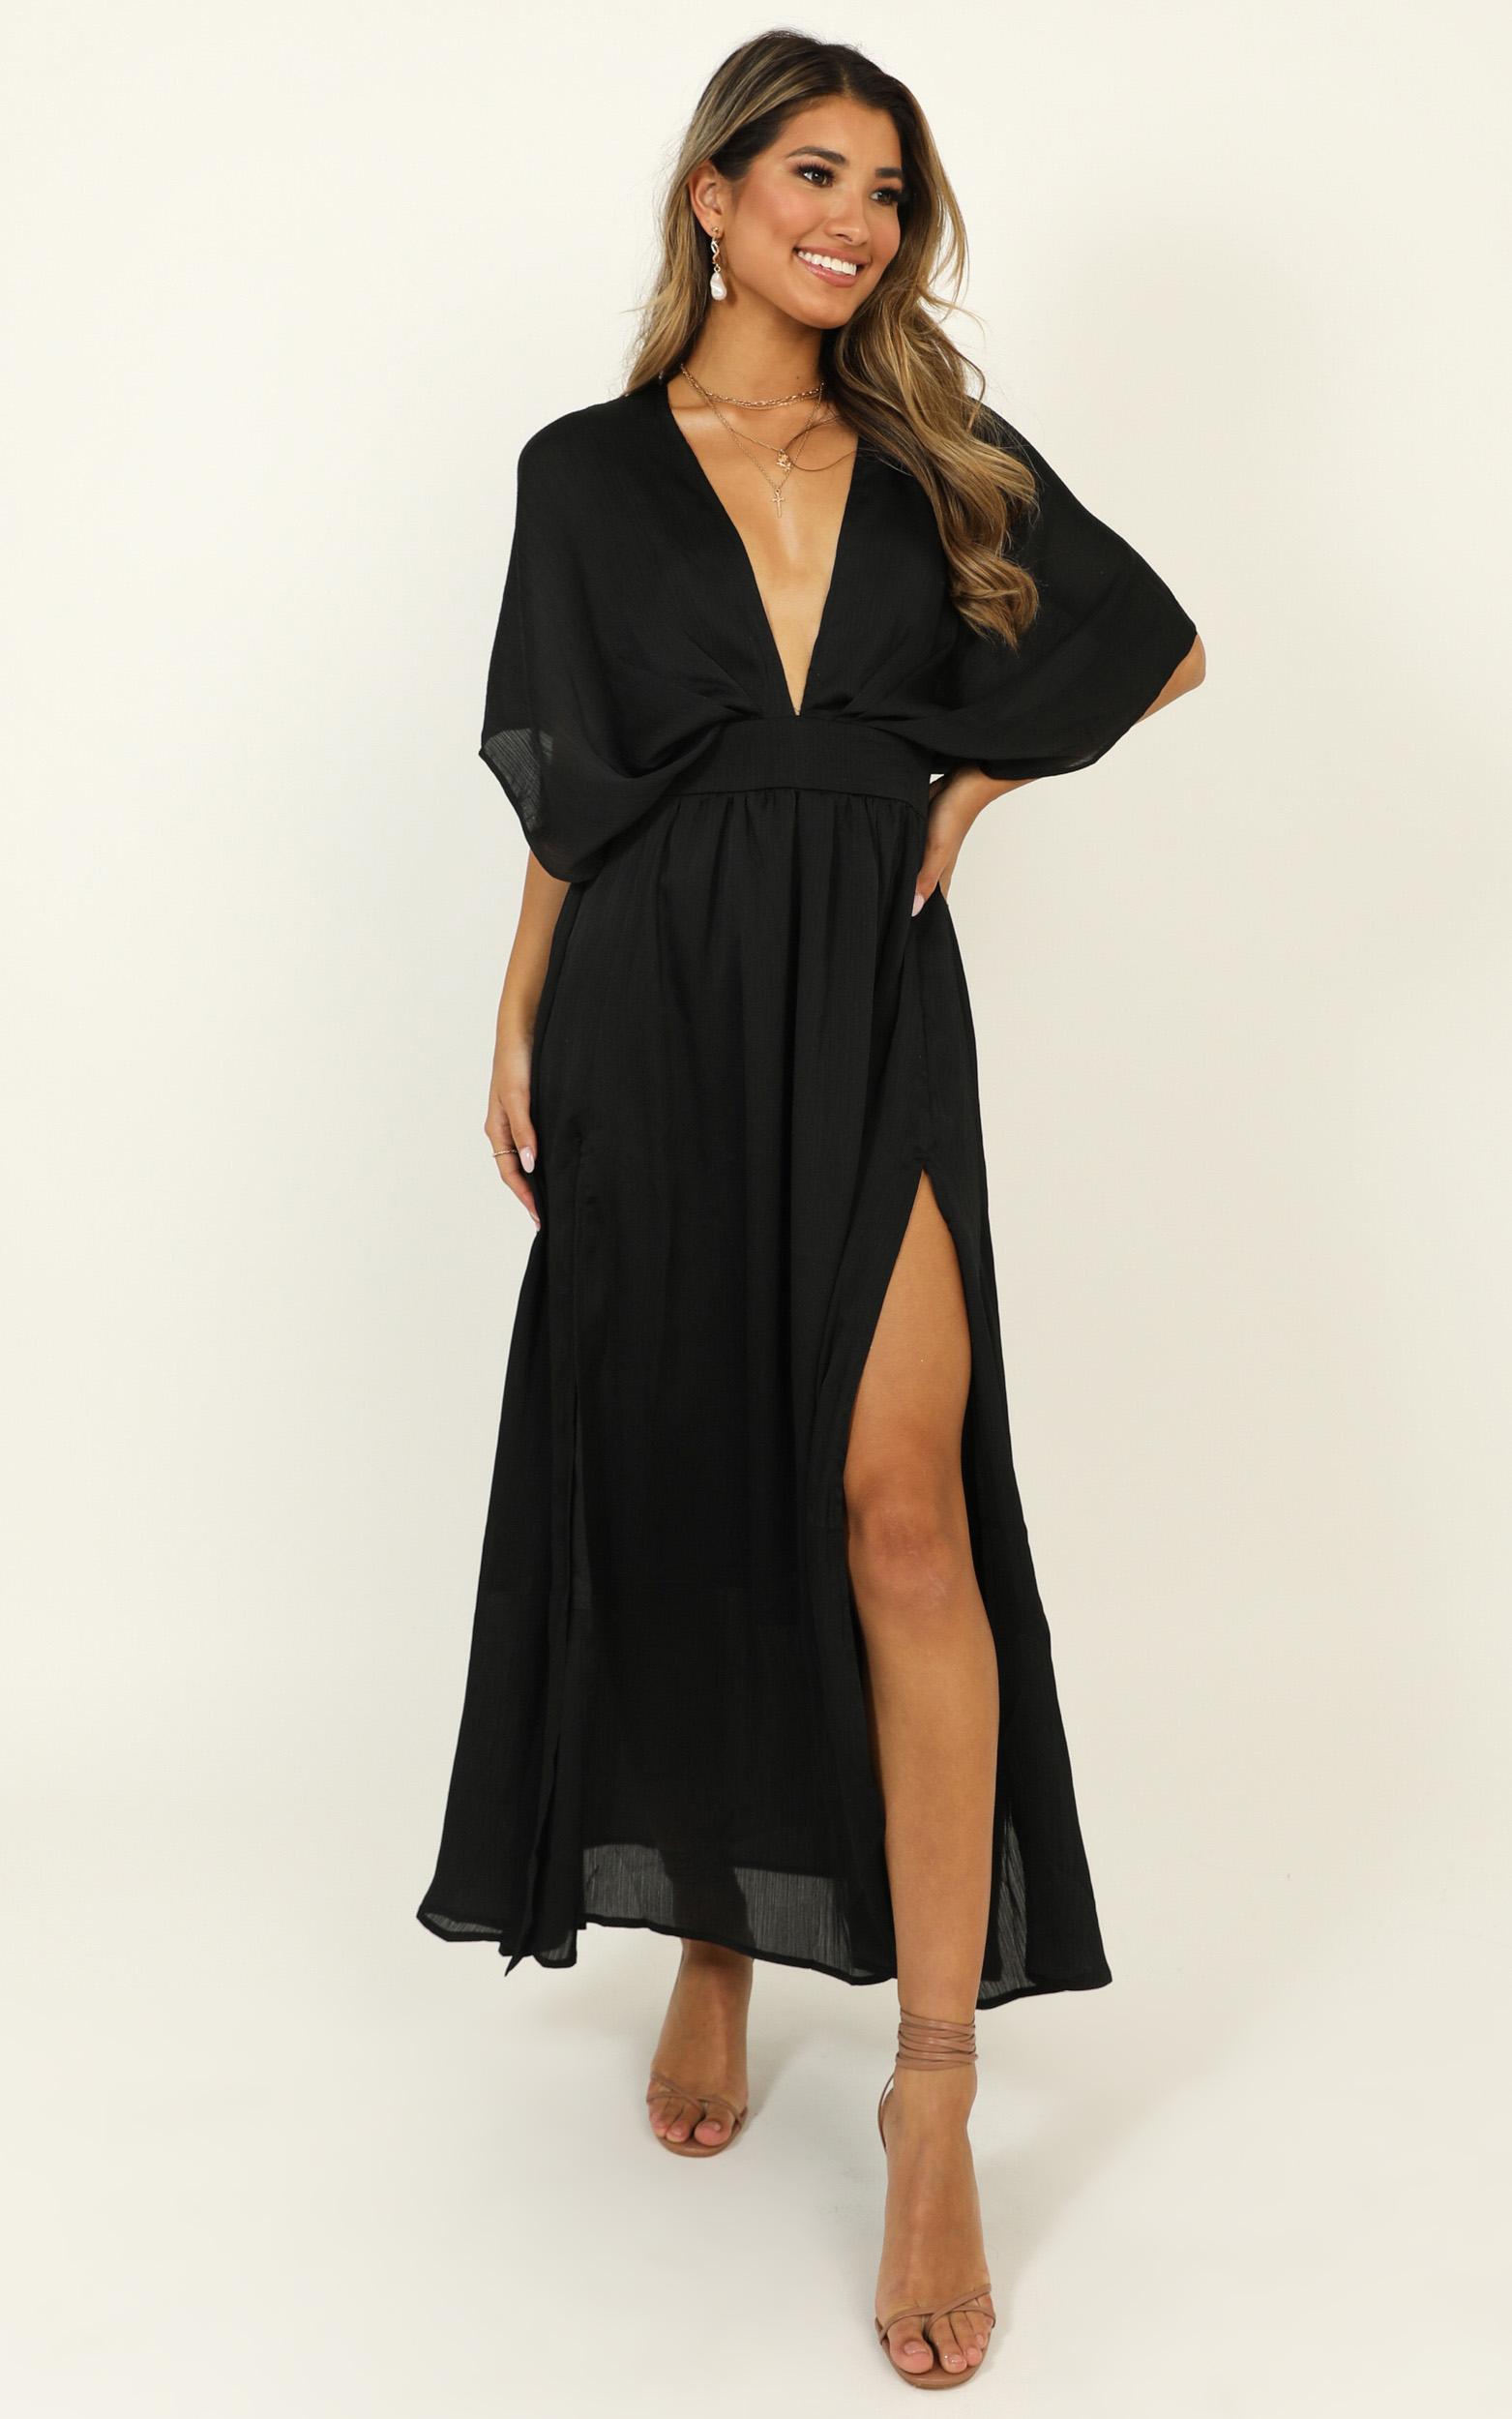 Save It For Later Dress in Black Satin - 14, BLK1, hi-res image number null